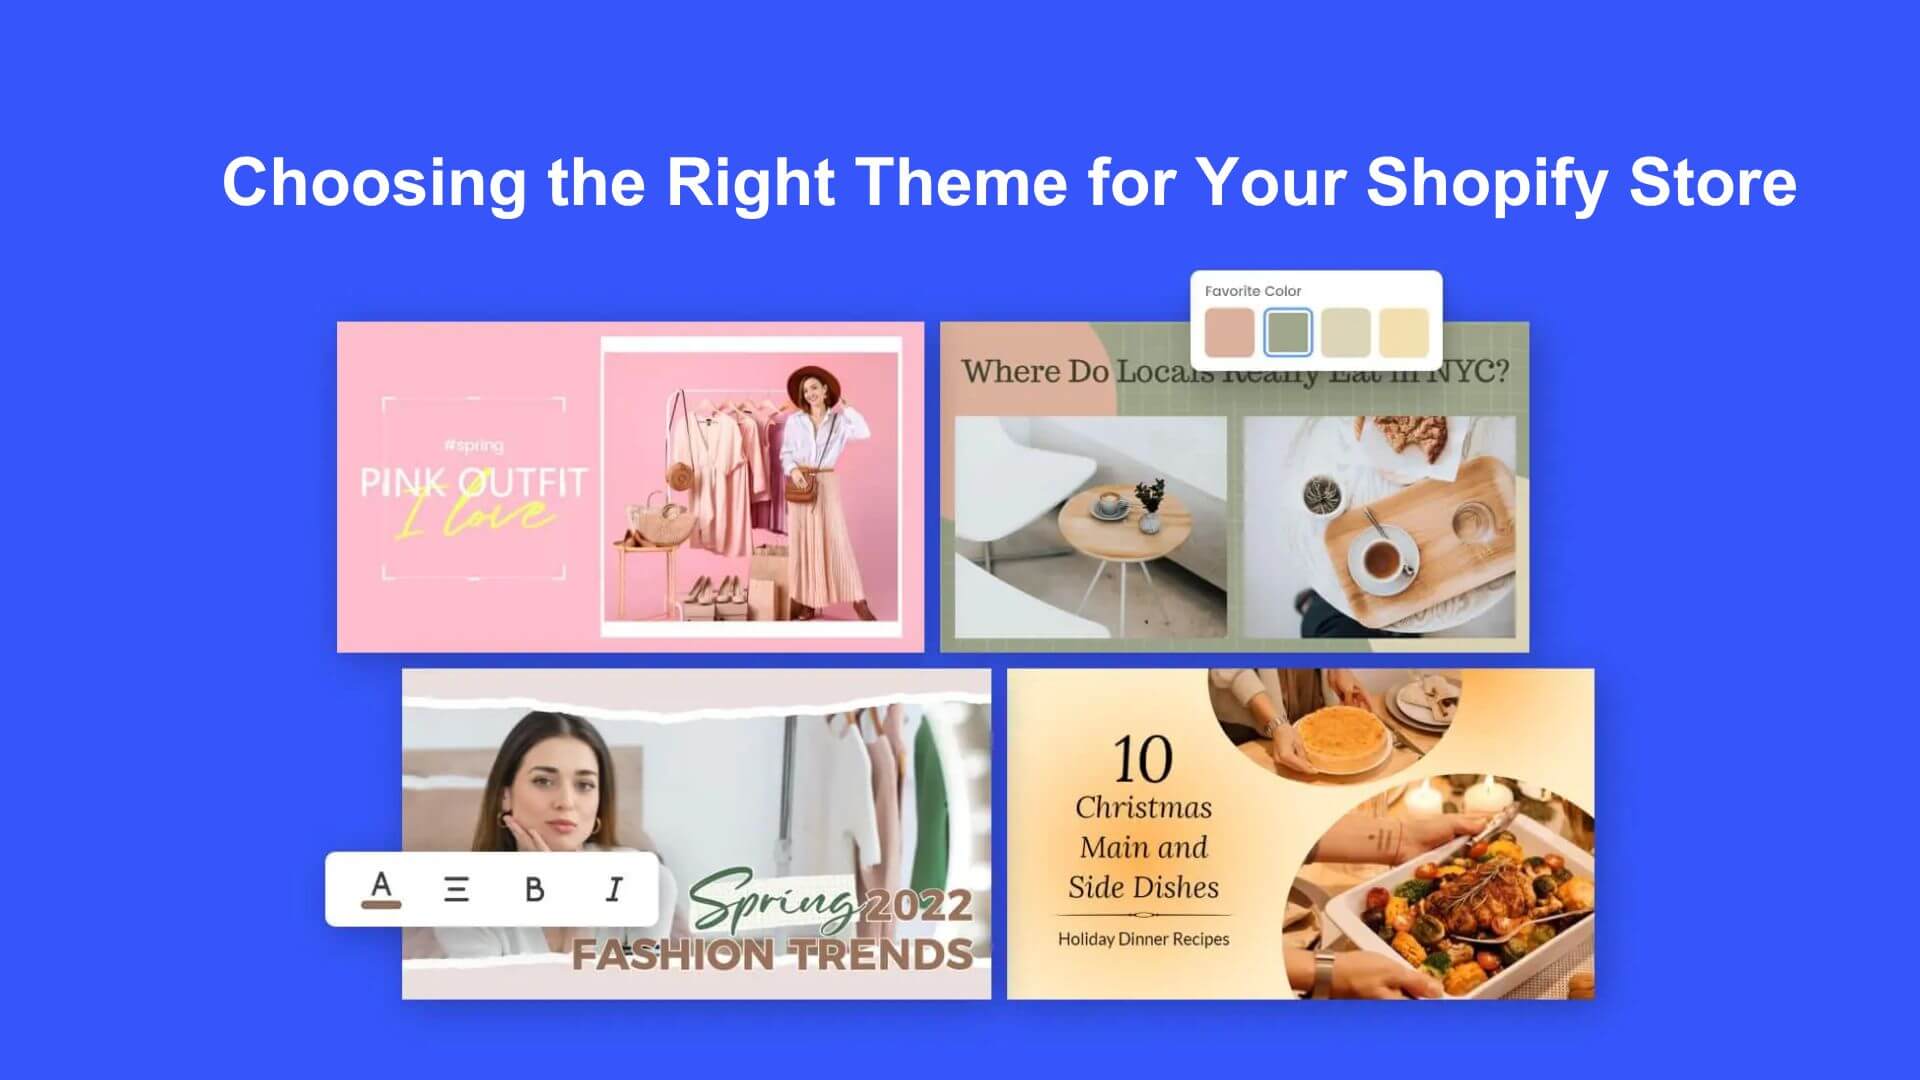 Choosing the Right Theme for Your Shopify Store